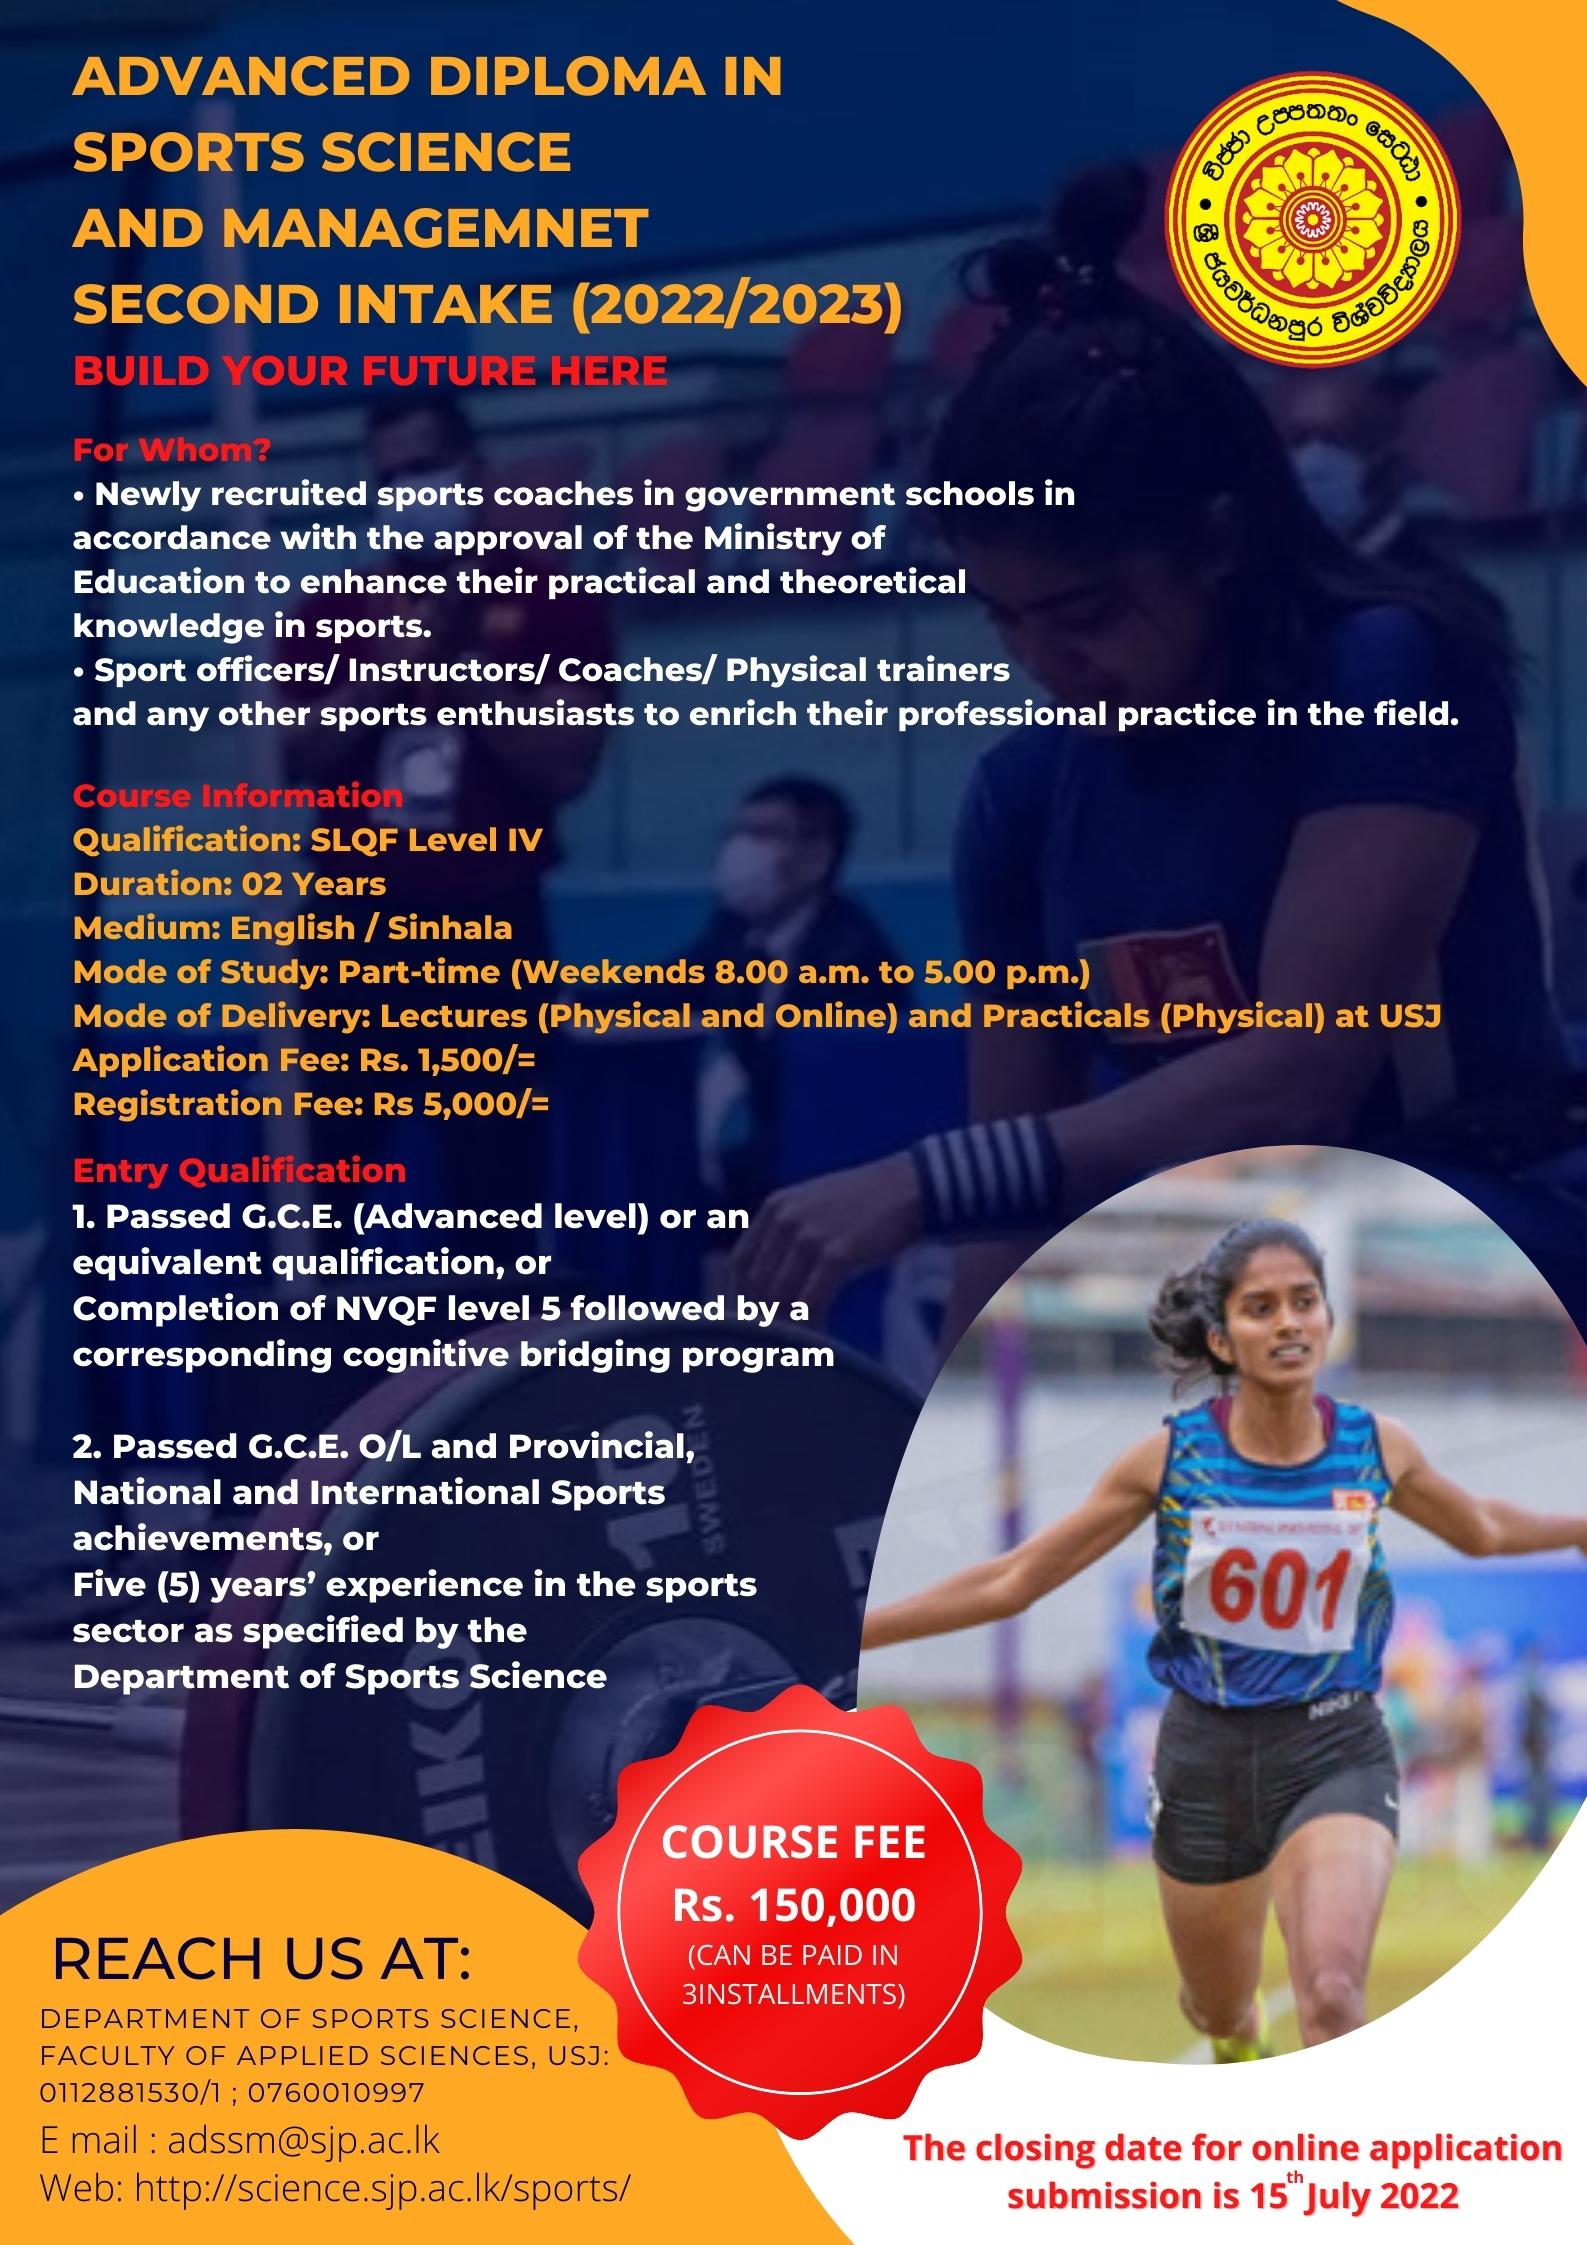 sport science courses